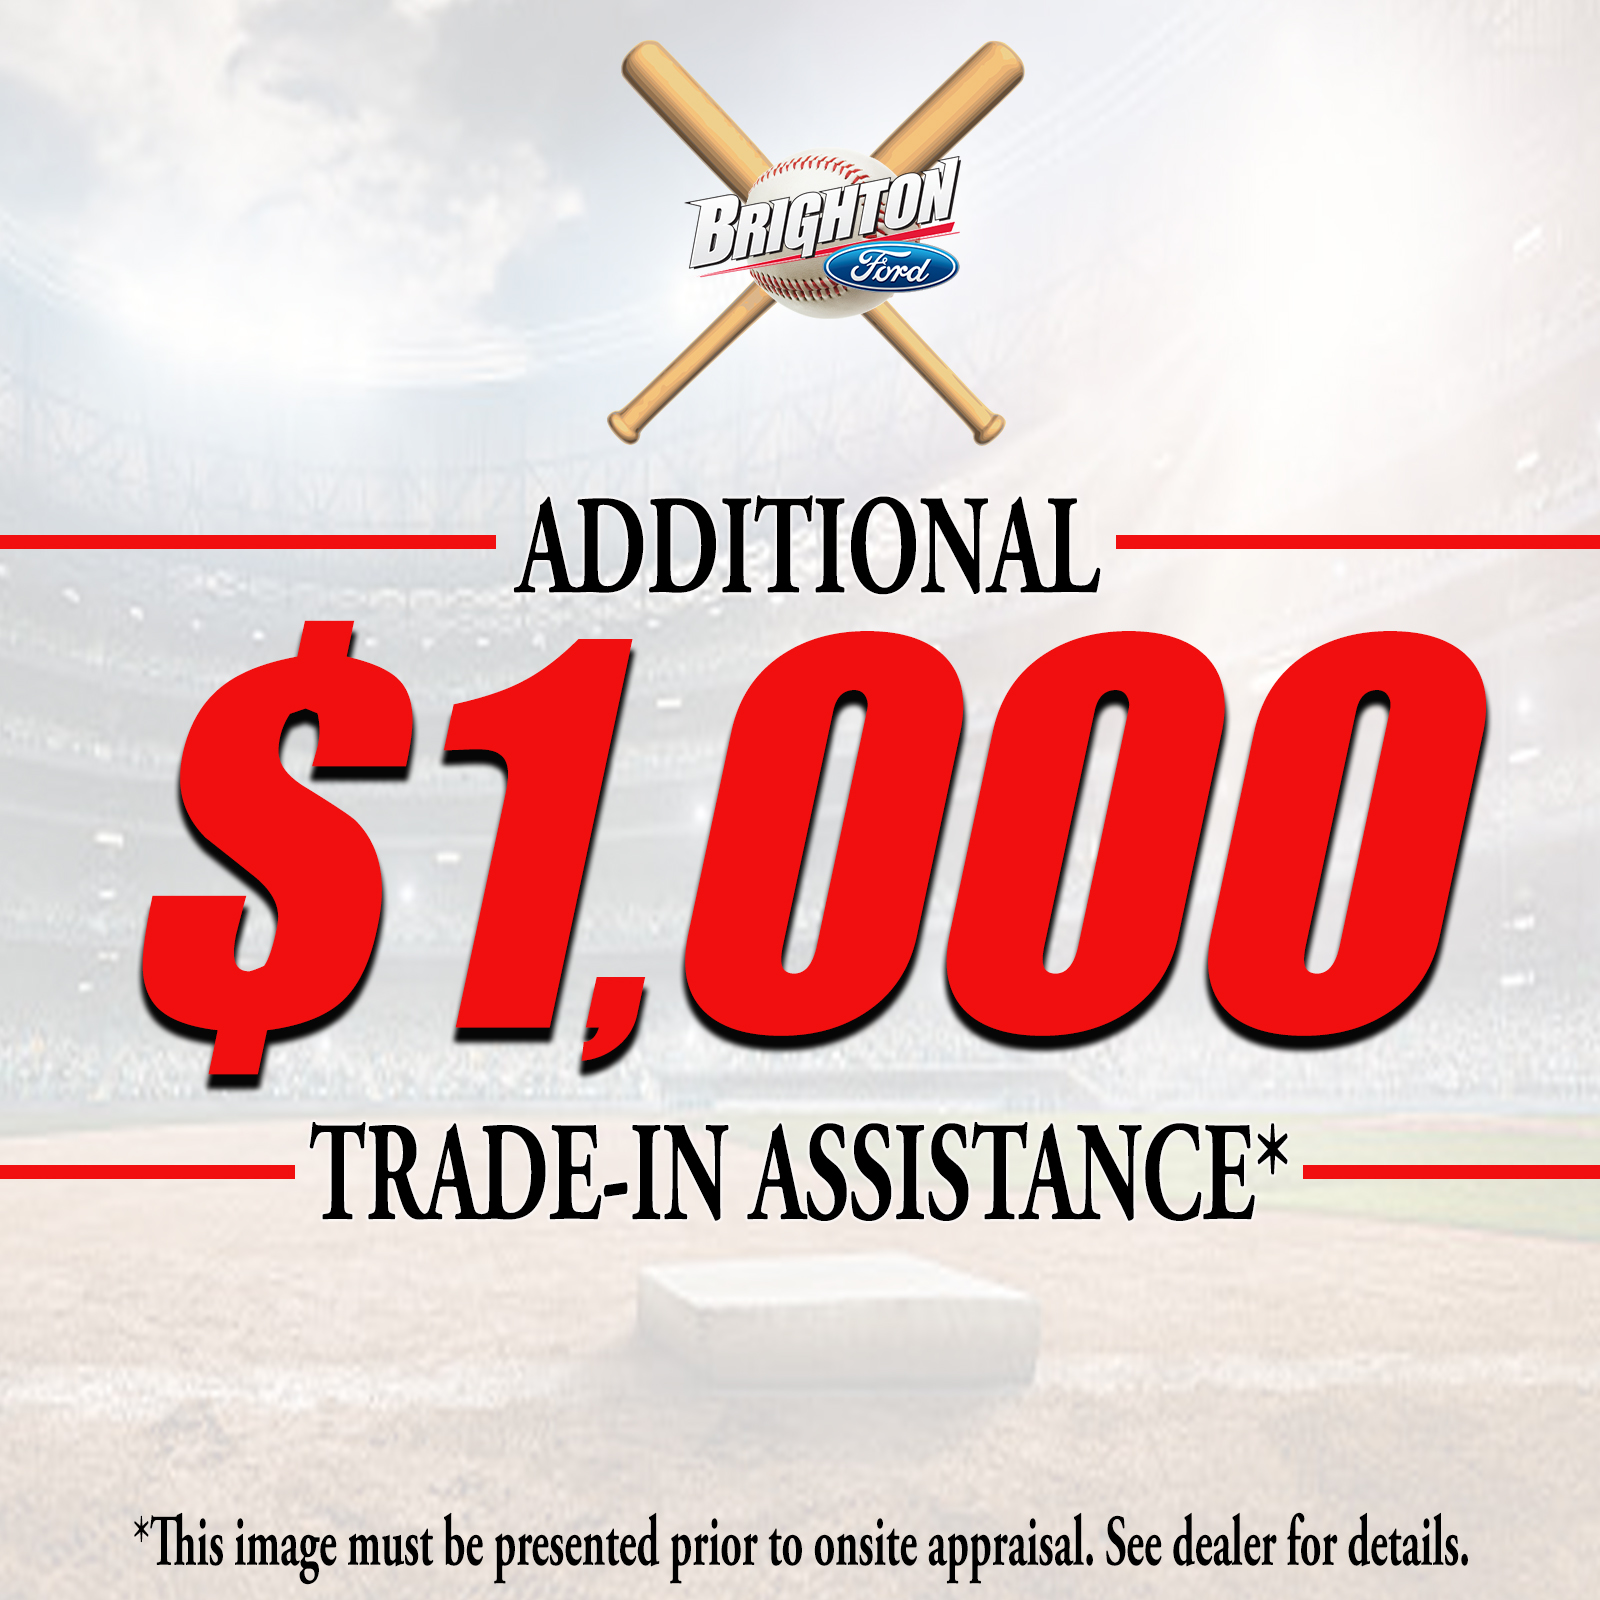 brighton-ford-1-000-trade-in-assistance-june